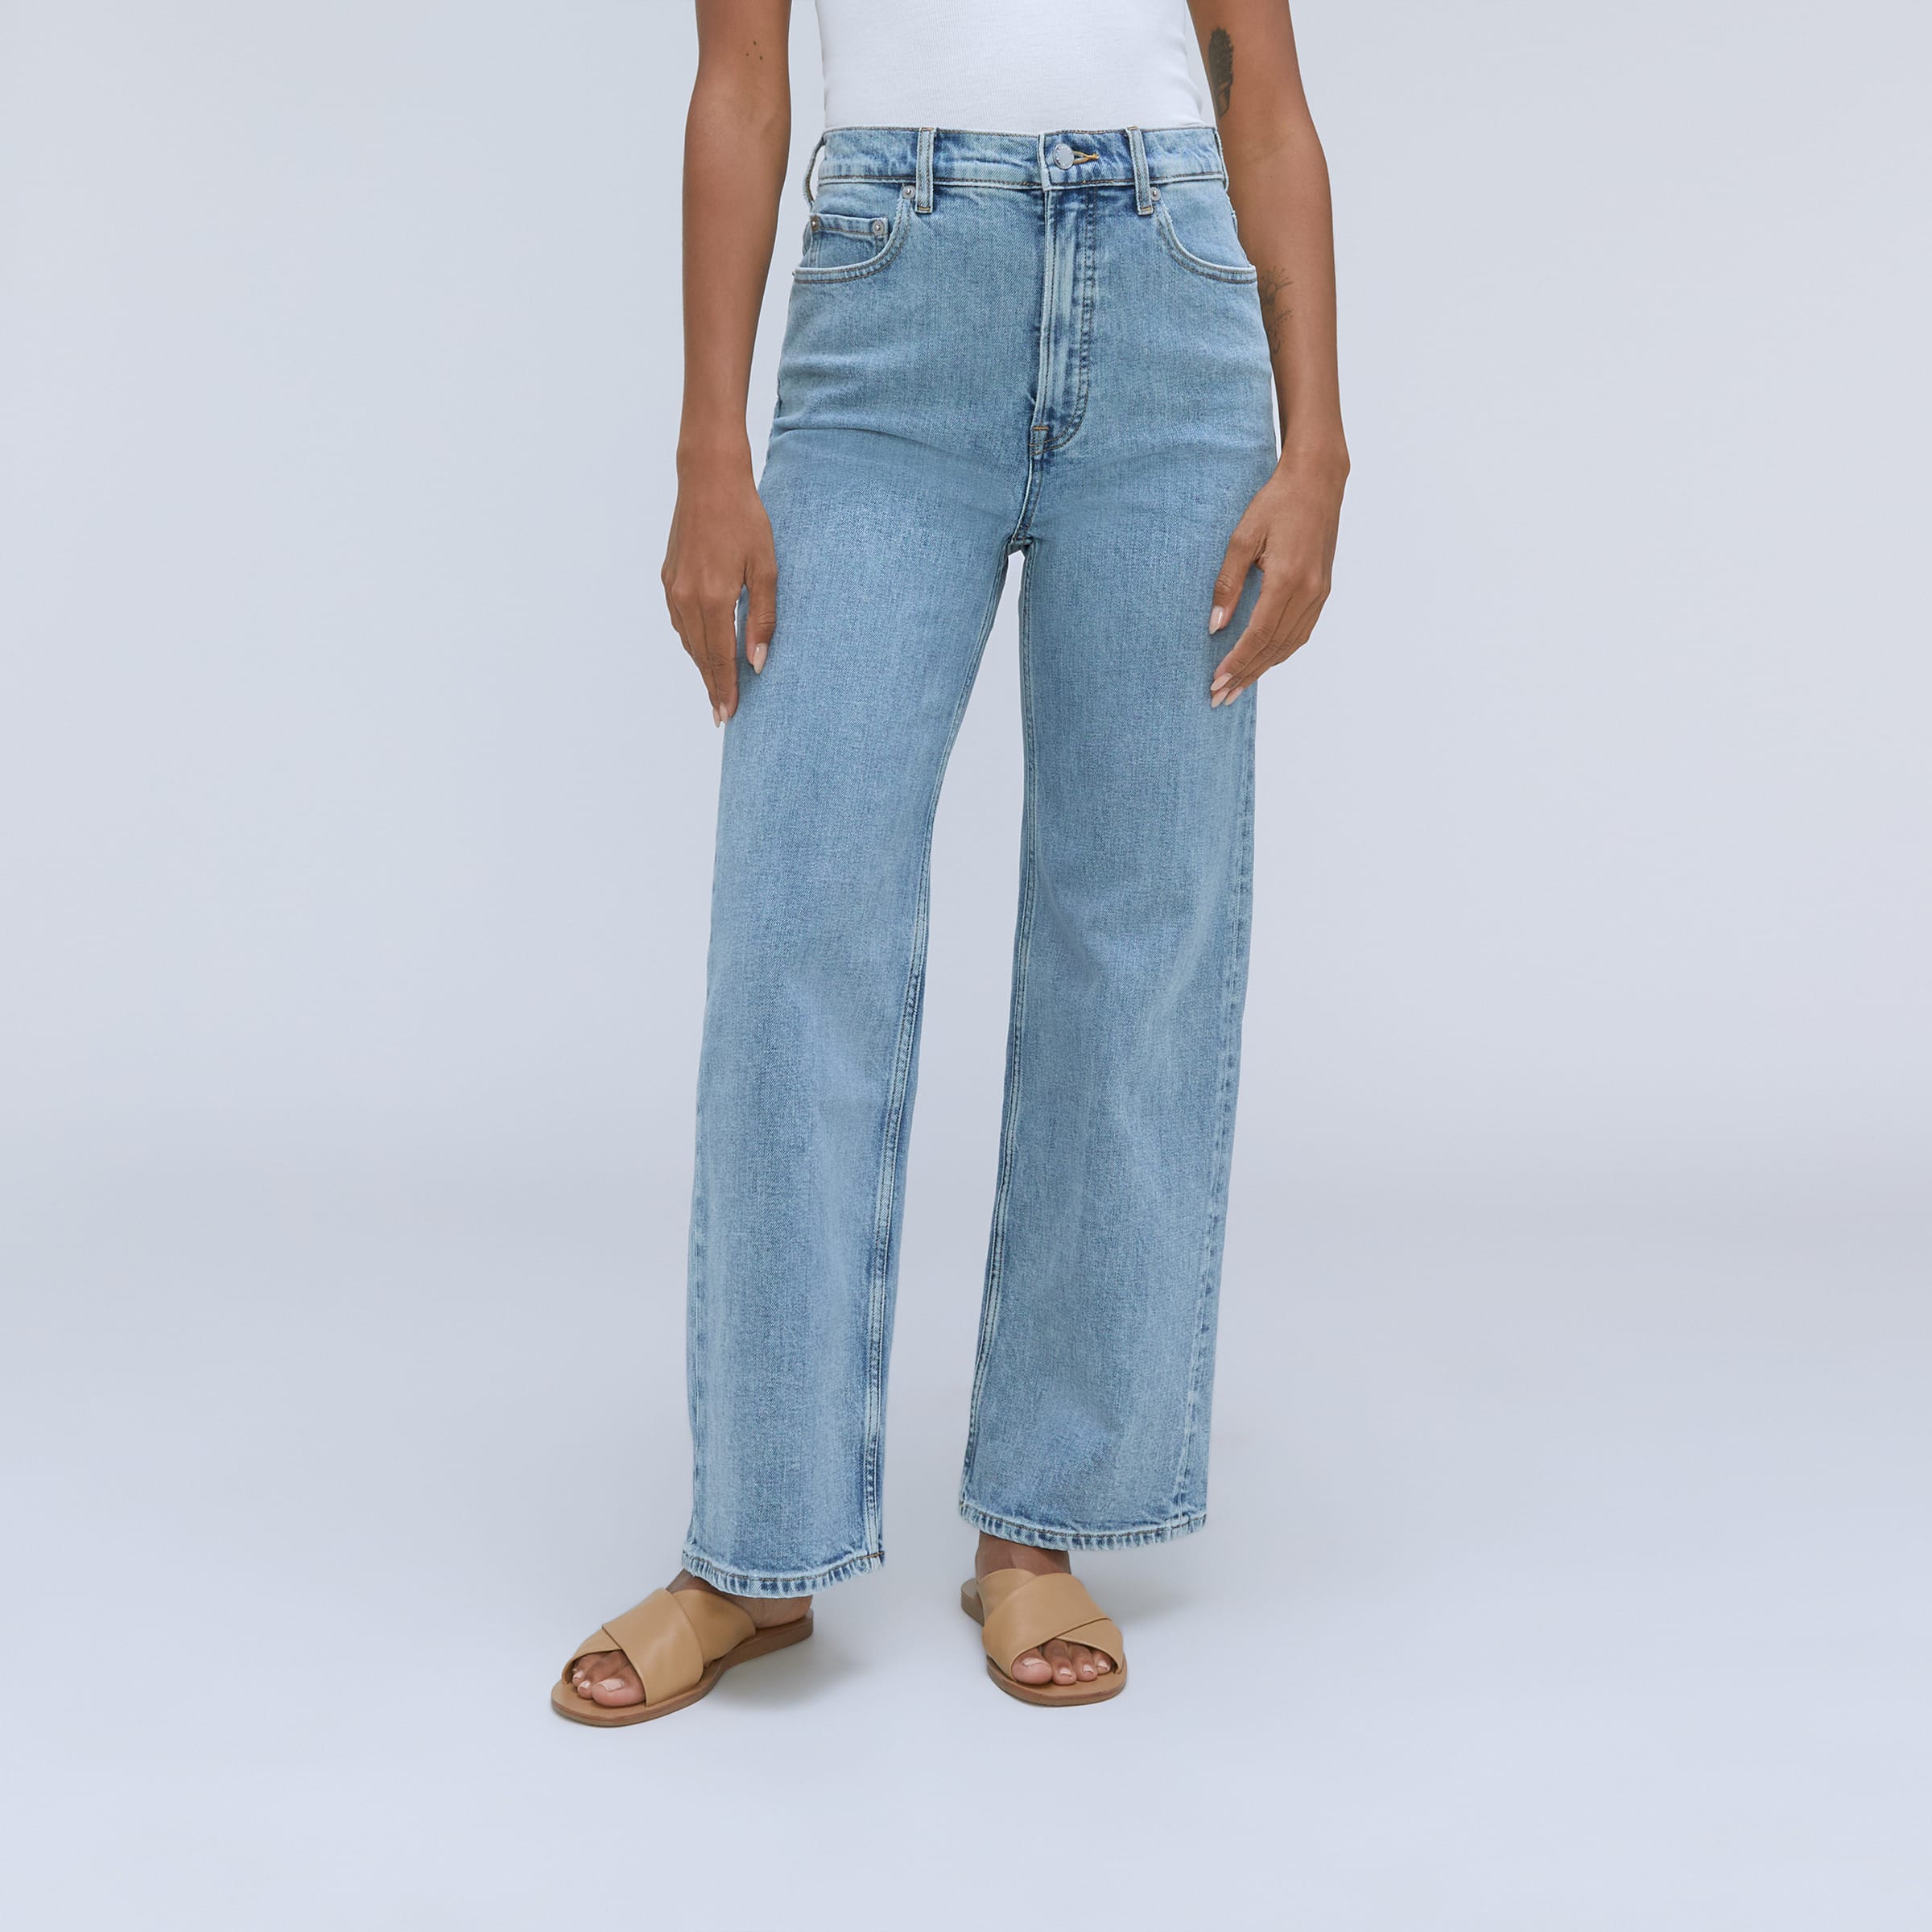 Madewell, Jeans, Madewell High Waisted Sailor Jeans Front Pockets